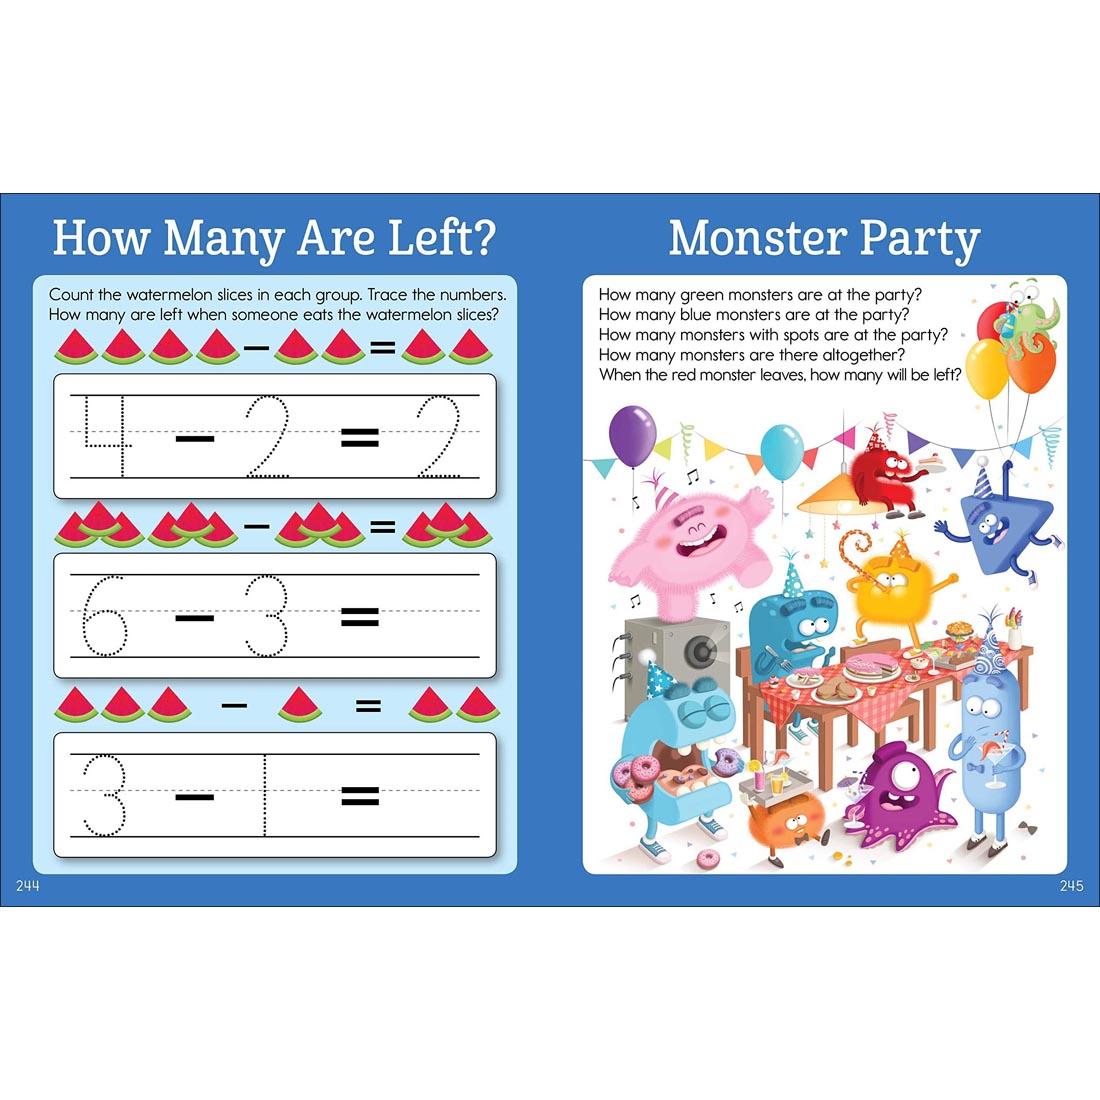 pages from inside the Highlights The Big Fun Preschool Workbook